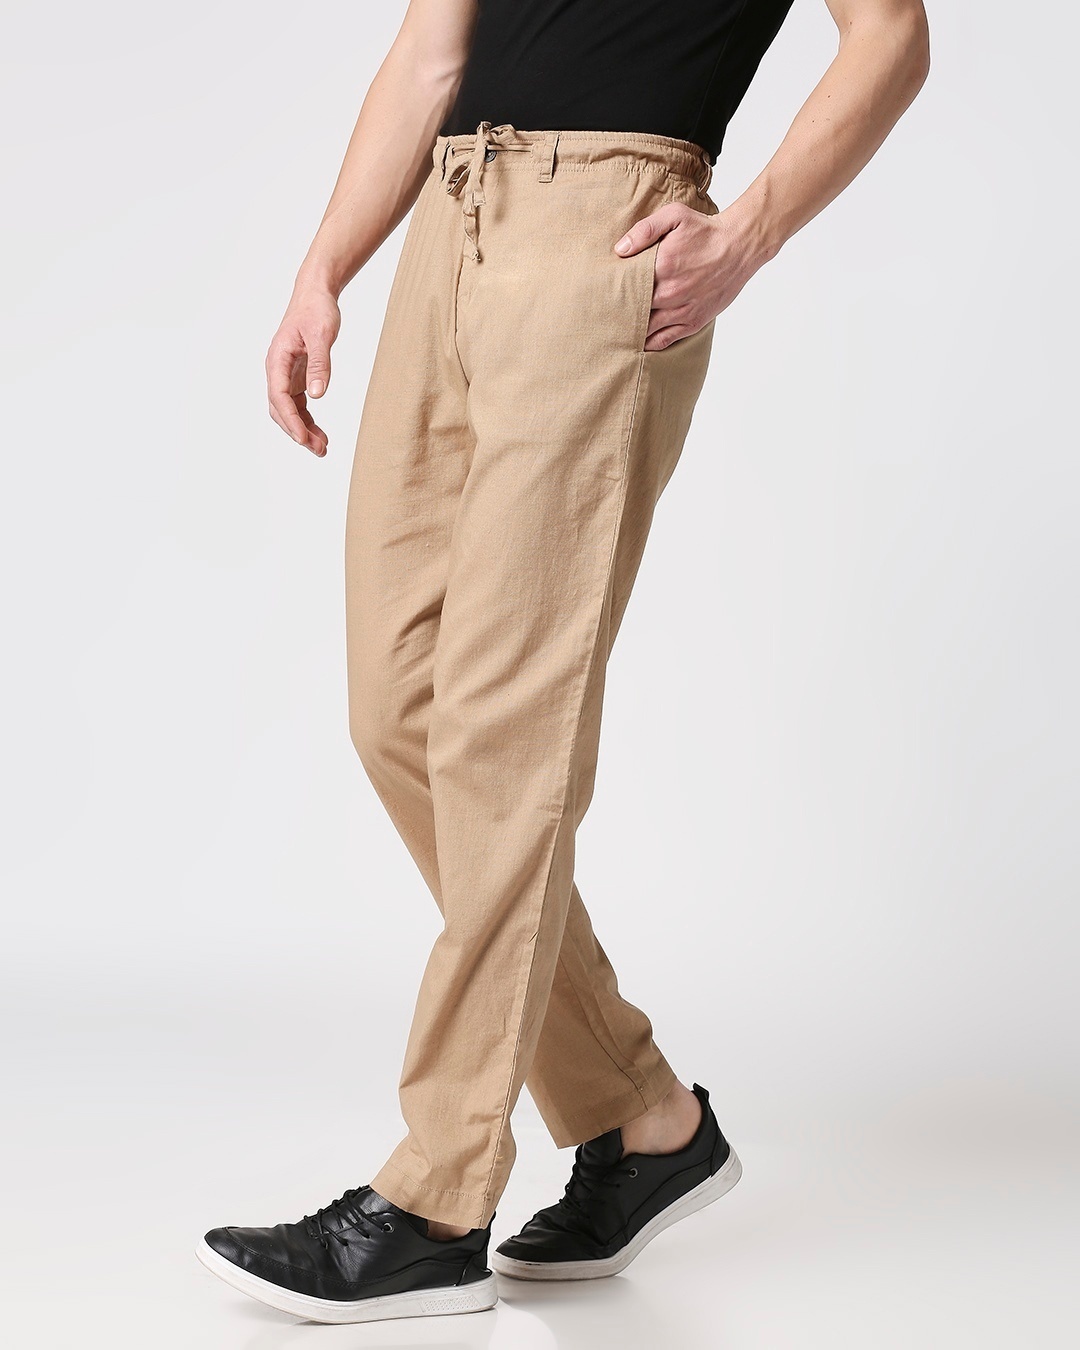 Buy Reelize  Mens Cotton Pant  6 Pockets  Cargo Pant  Full length   Mud Color  Ideal for Casual  Party  Office wear  Pack of 1  Size 38  Online at Best Prices in India  JioMart